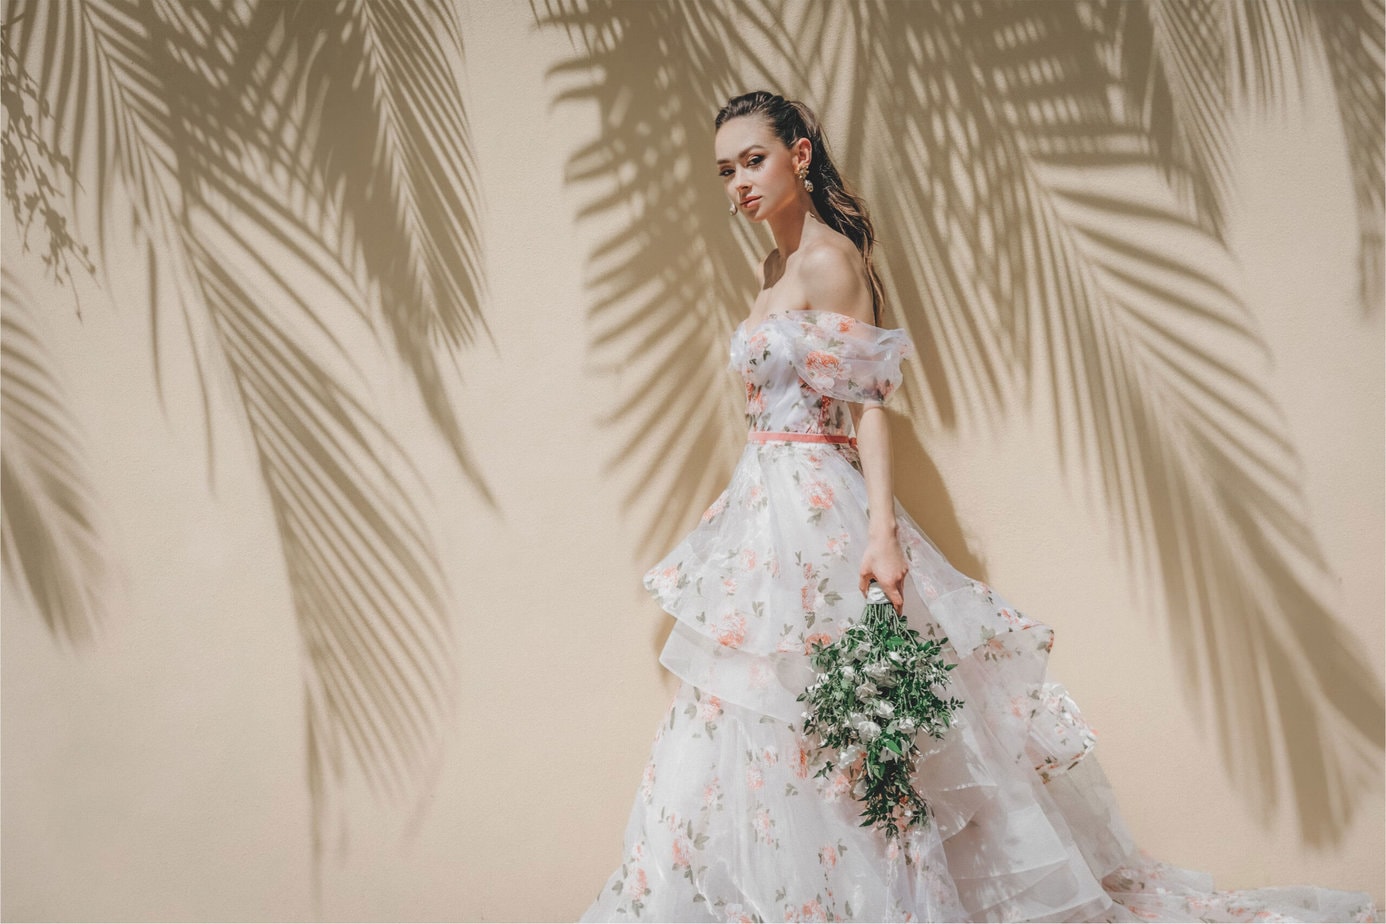 A Pastel Lace Wedding Gown For This Sophisticated Rainbow